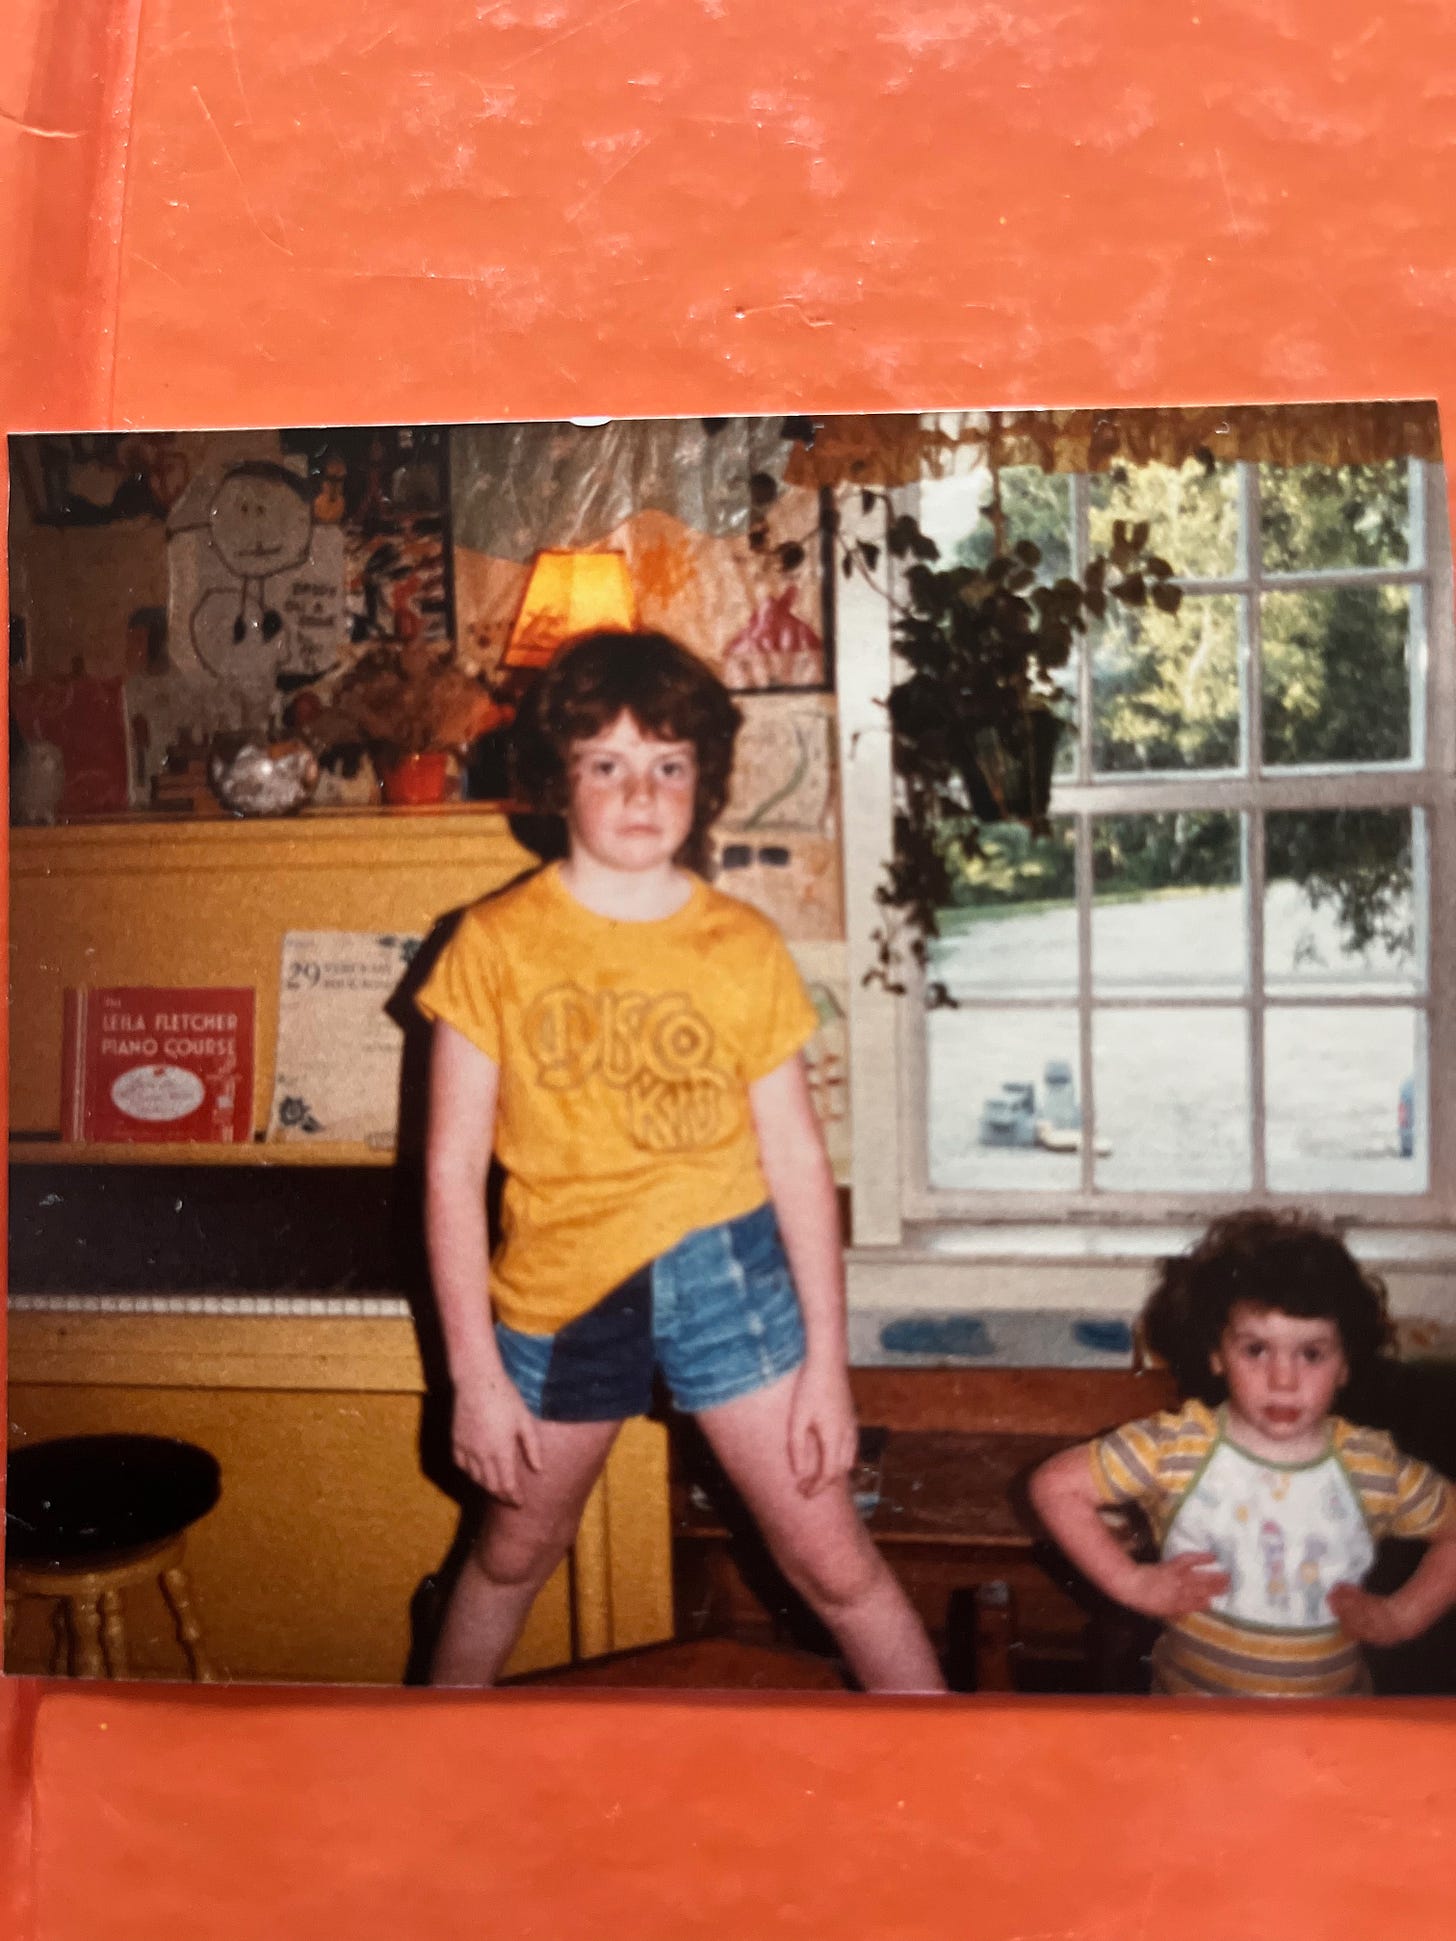 Photograph of two children one standing on a wooden box wearing a "Disco Kid" t-shirt, the other below with curly hair.